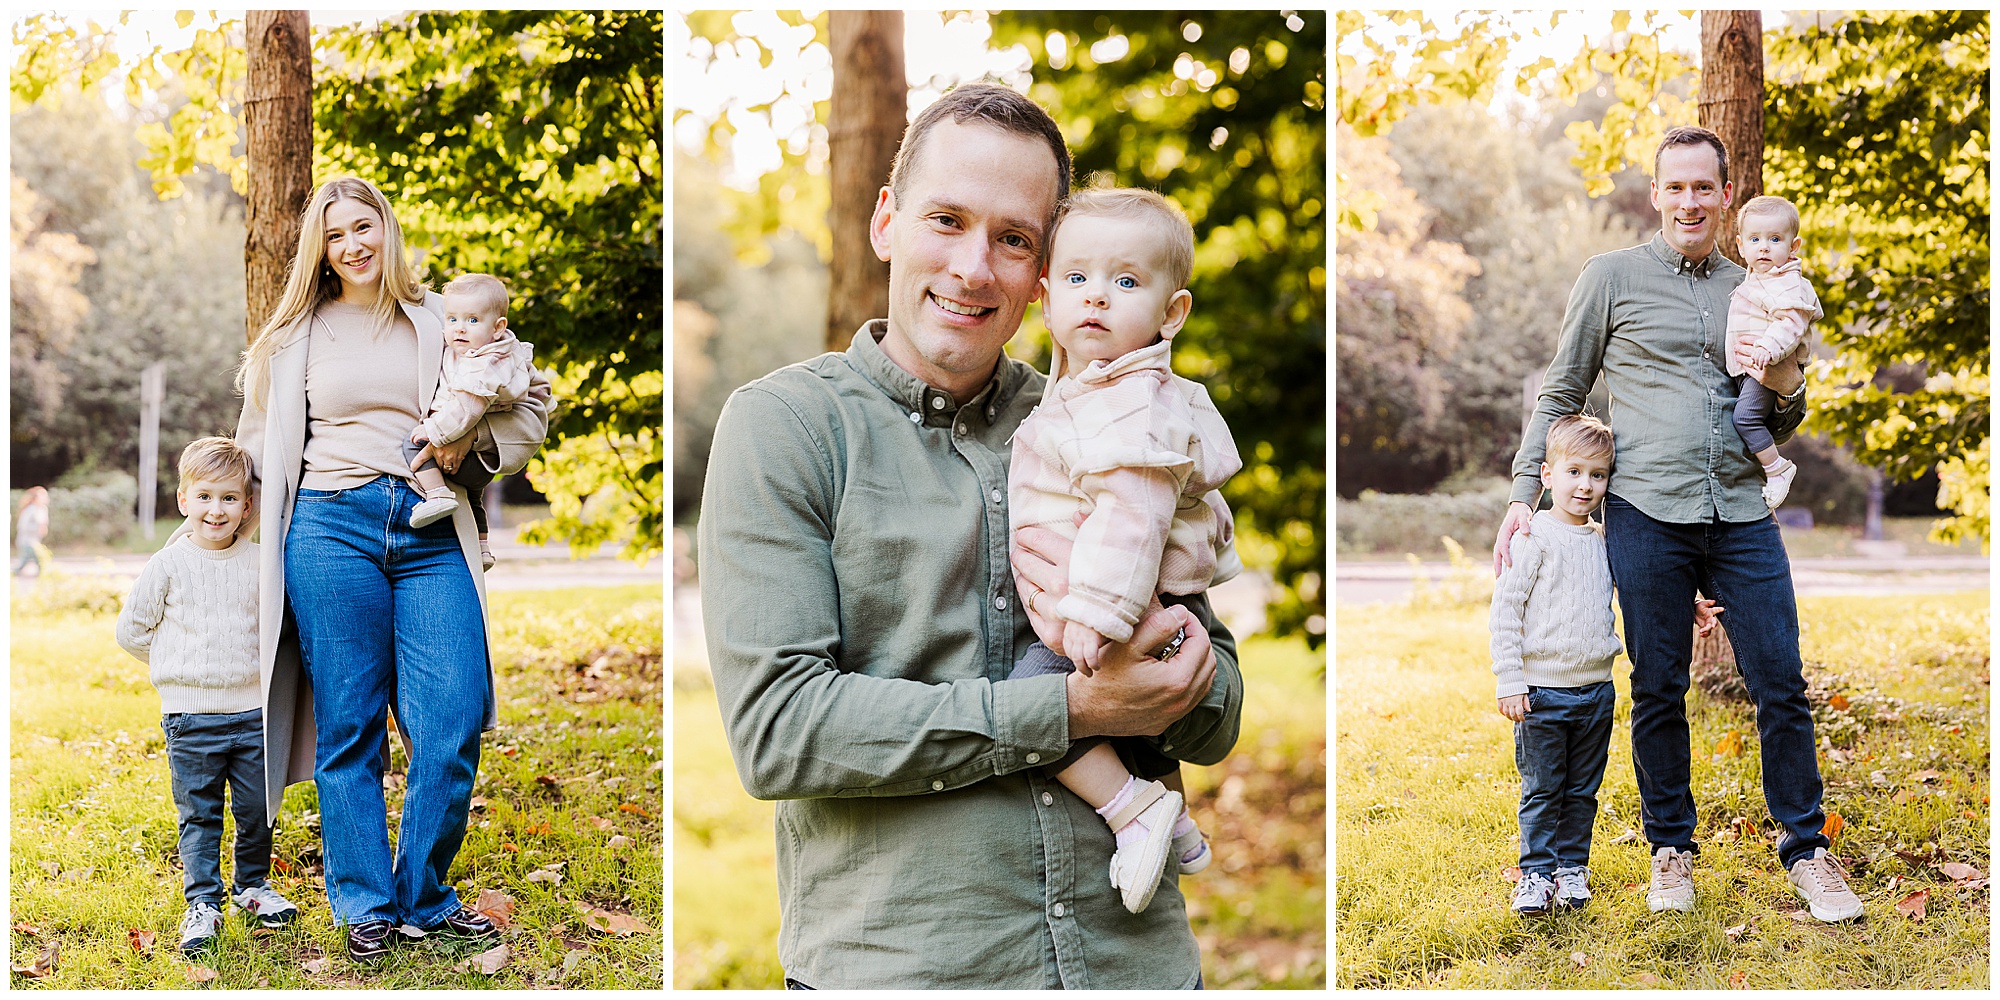 Whimsical family session in Autumn